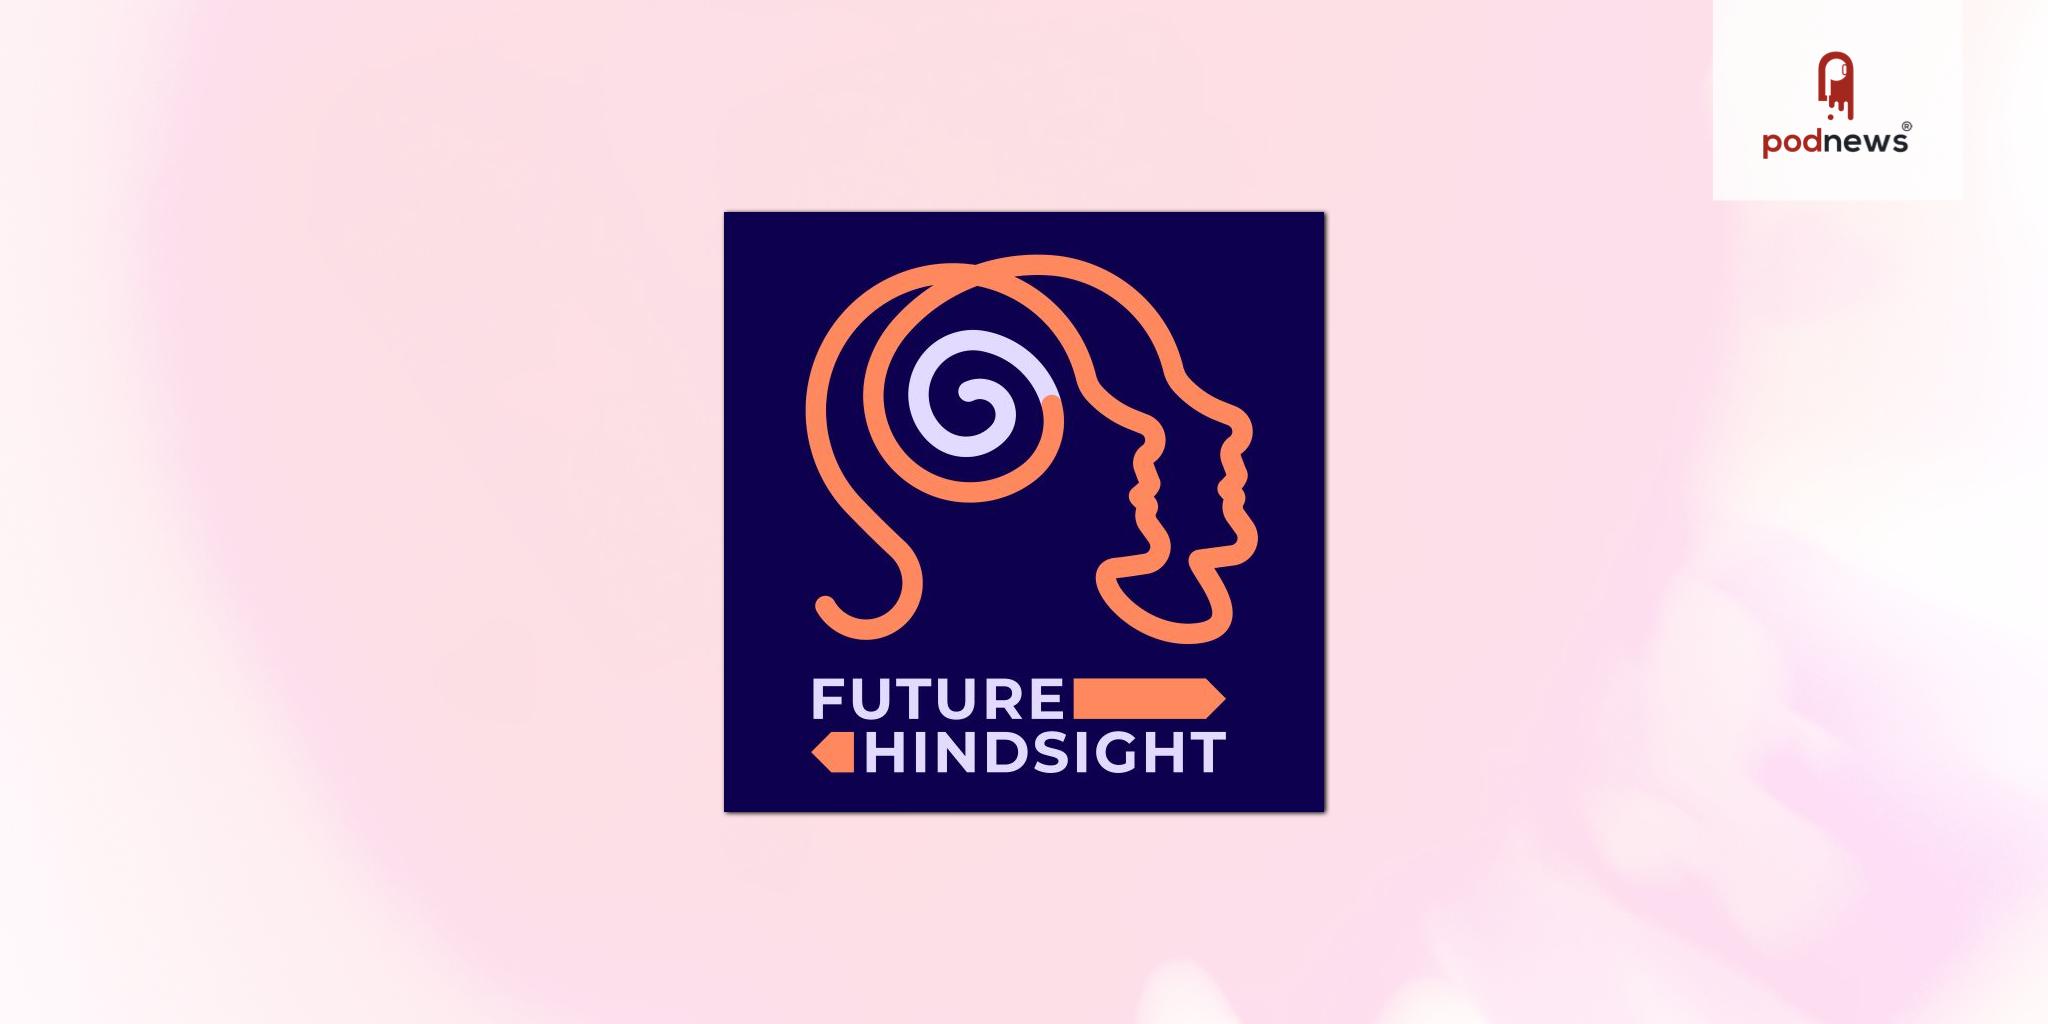 Future Hindsight to Bring Independent, Unaffiliated Perspective to Voters During 2024 Election Cycle